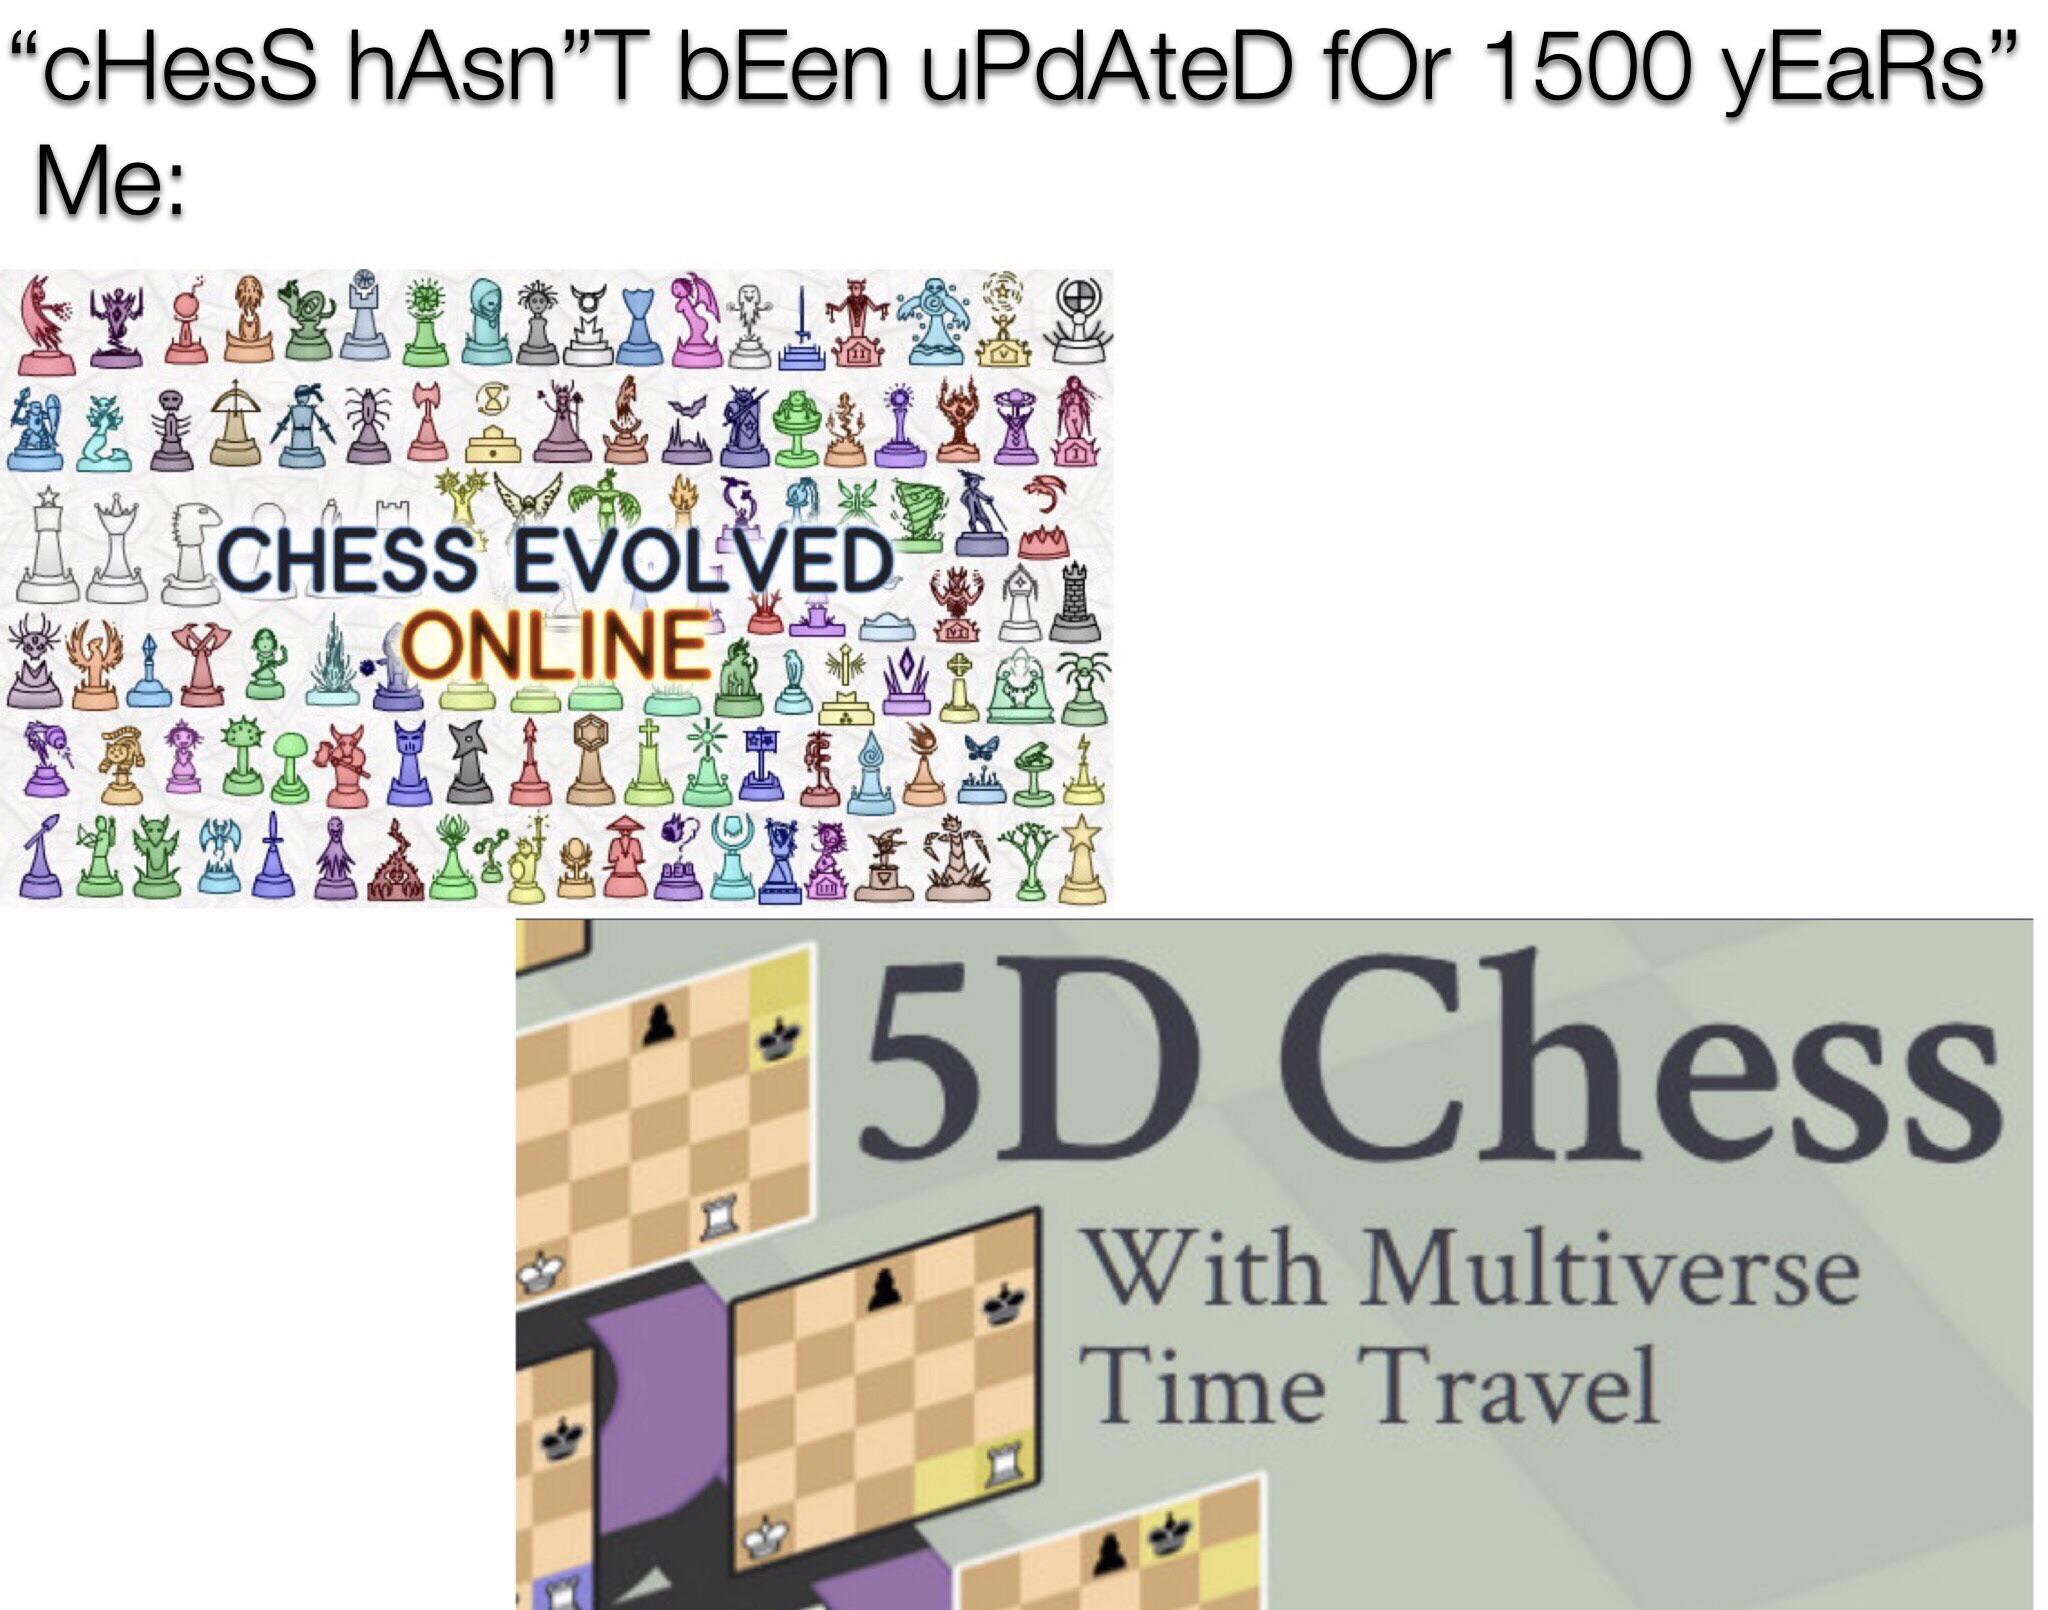 5d chess psychological horror - "CHesS hAsnT bEen uPdAteD for 1500 Years Me 12.Ili... I SAILS_128, Al Chess Evolved 2442 4.Online 1211I141.Zzslexia 5D Chess With Multiverse Time Travel